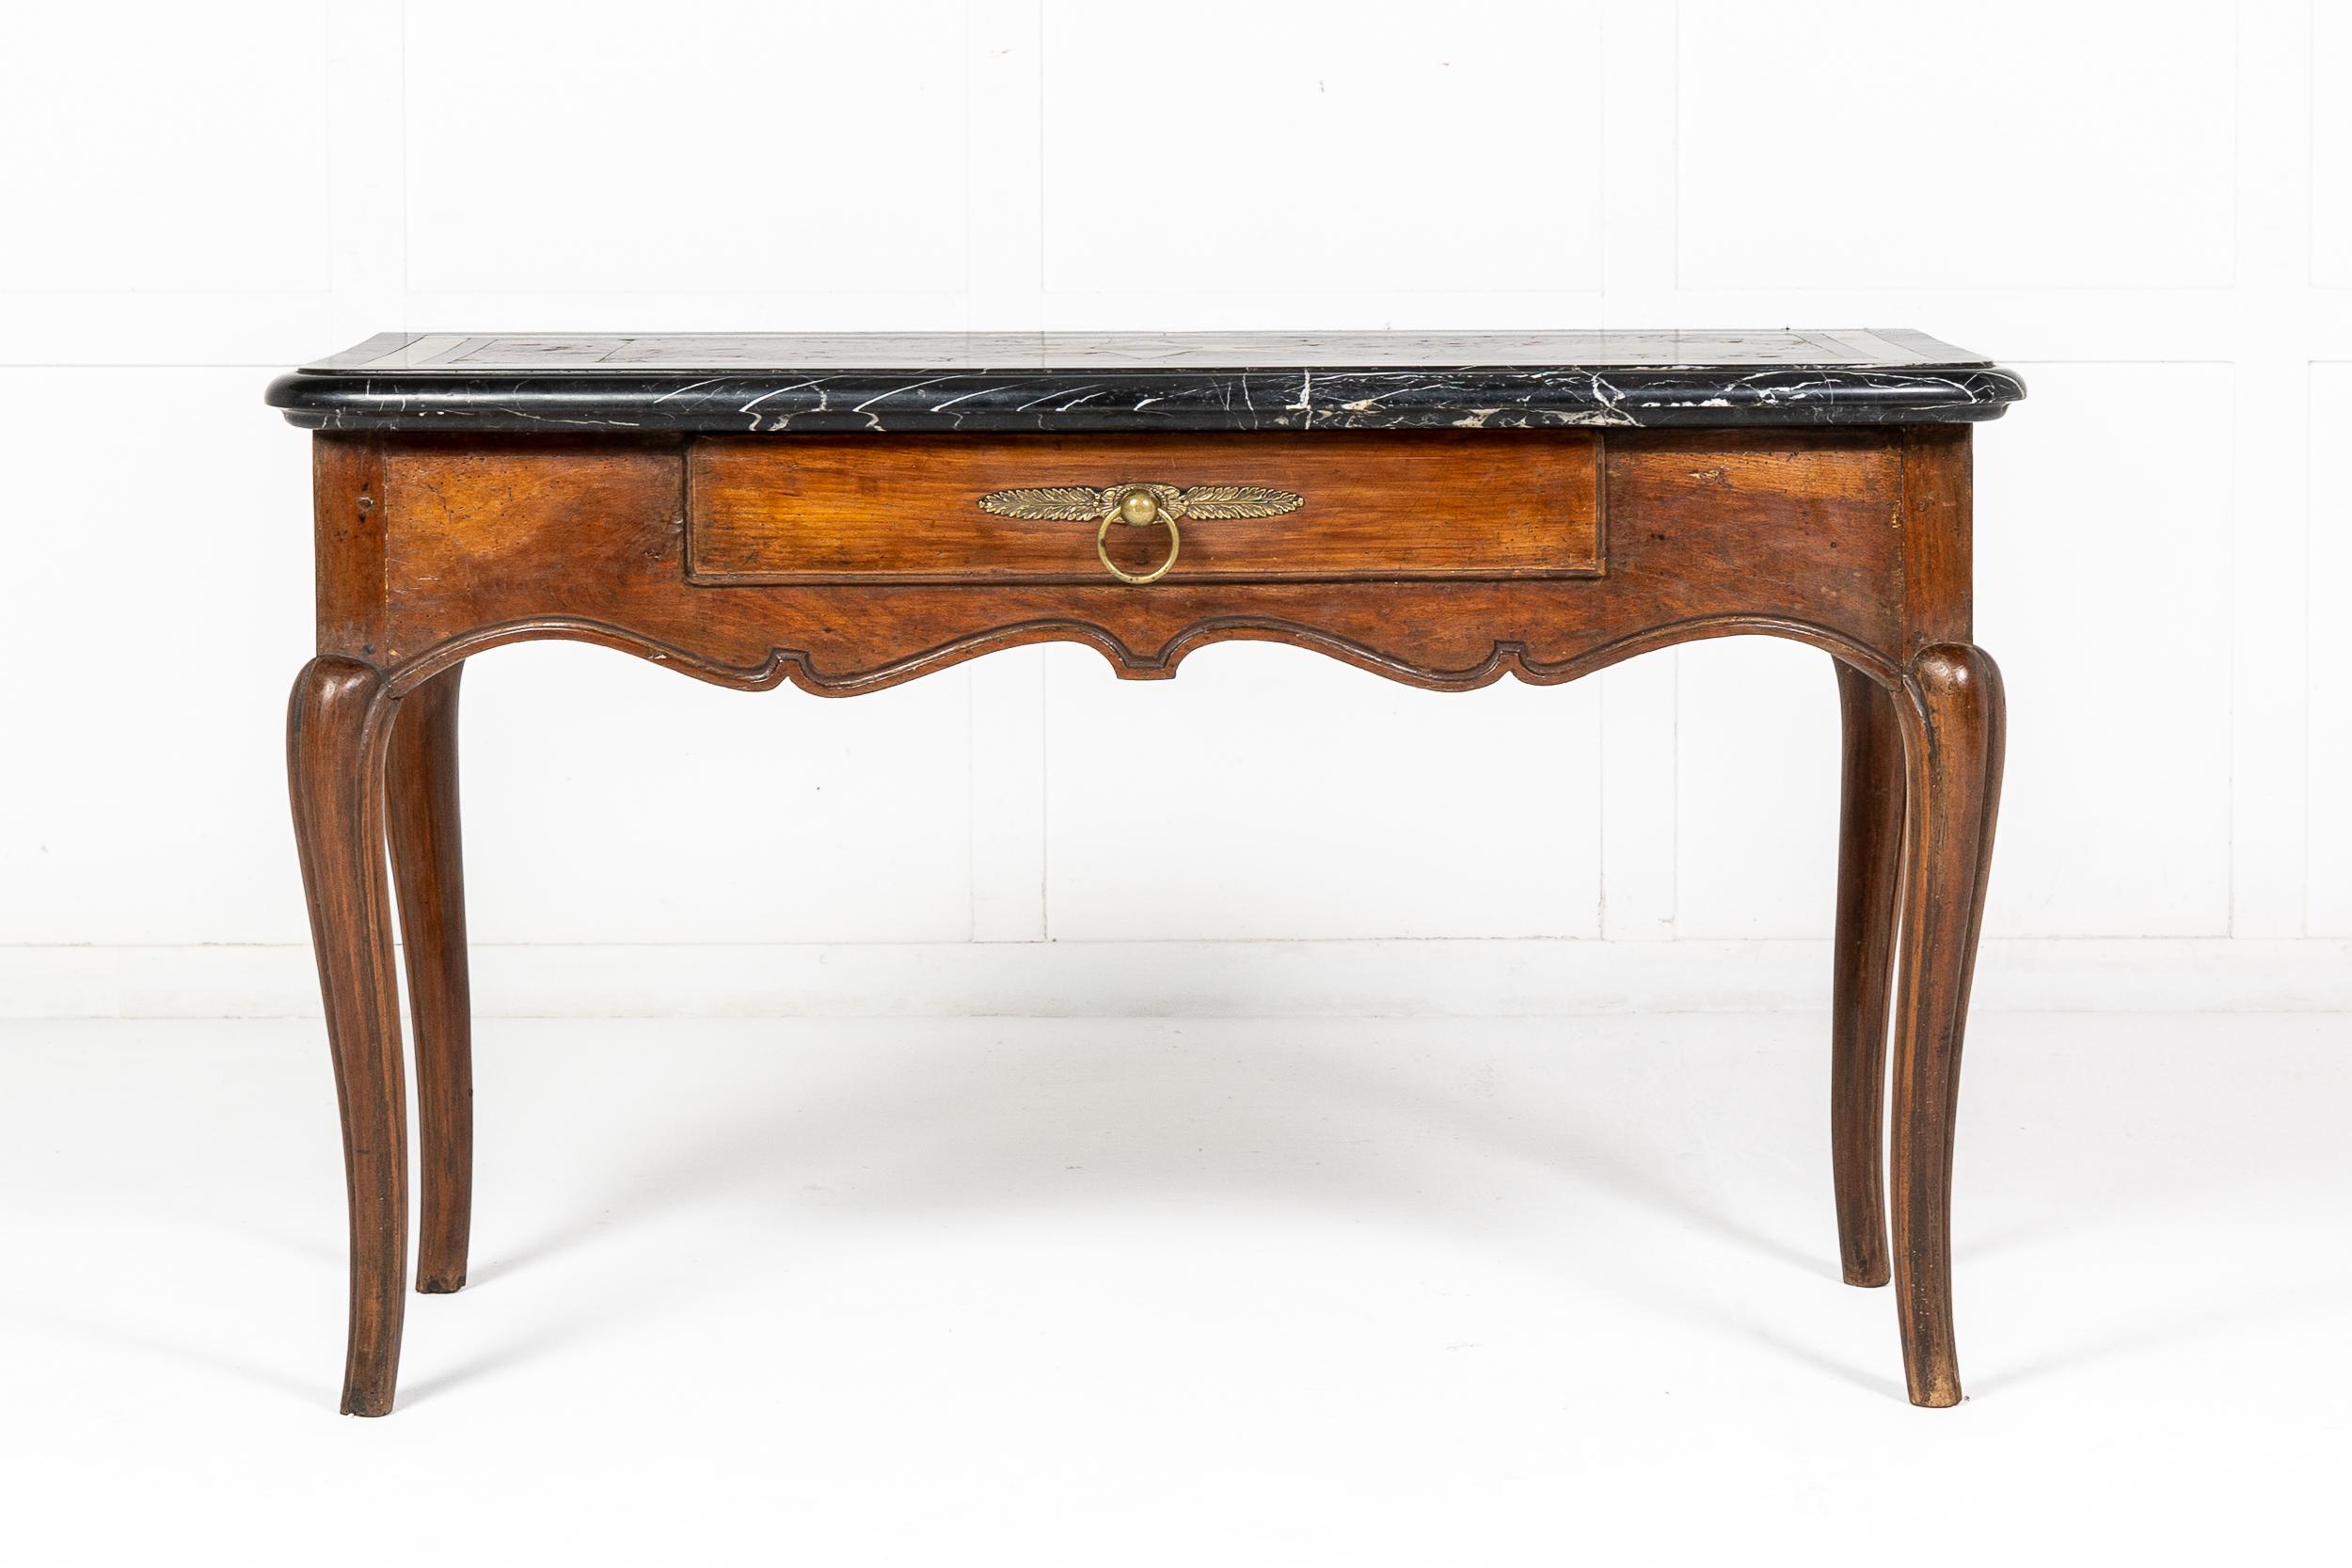 A classic French 18th century console table with outstanding thick top of various marbles having a central star motif.
The deep carved and moulded frieze, has a single central drawer, with a large ring pull handle, adjoining long cabriole legs.